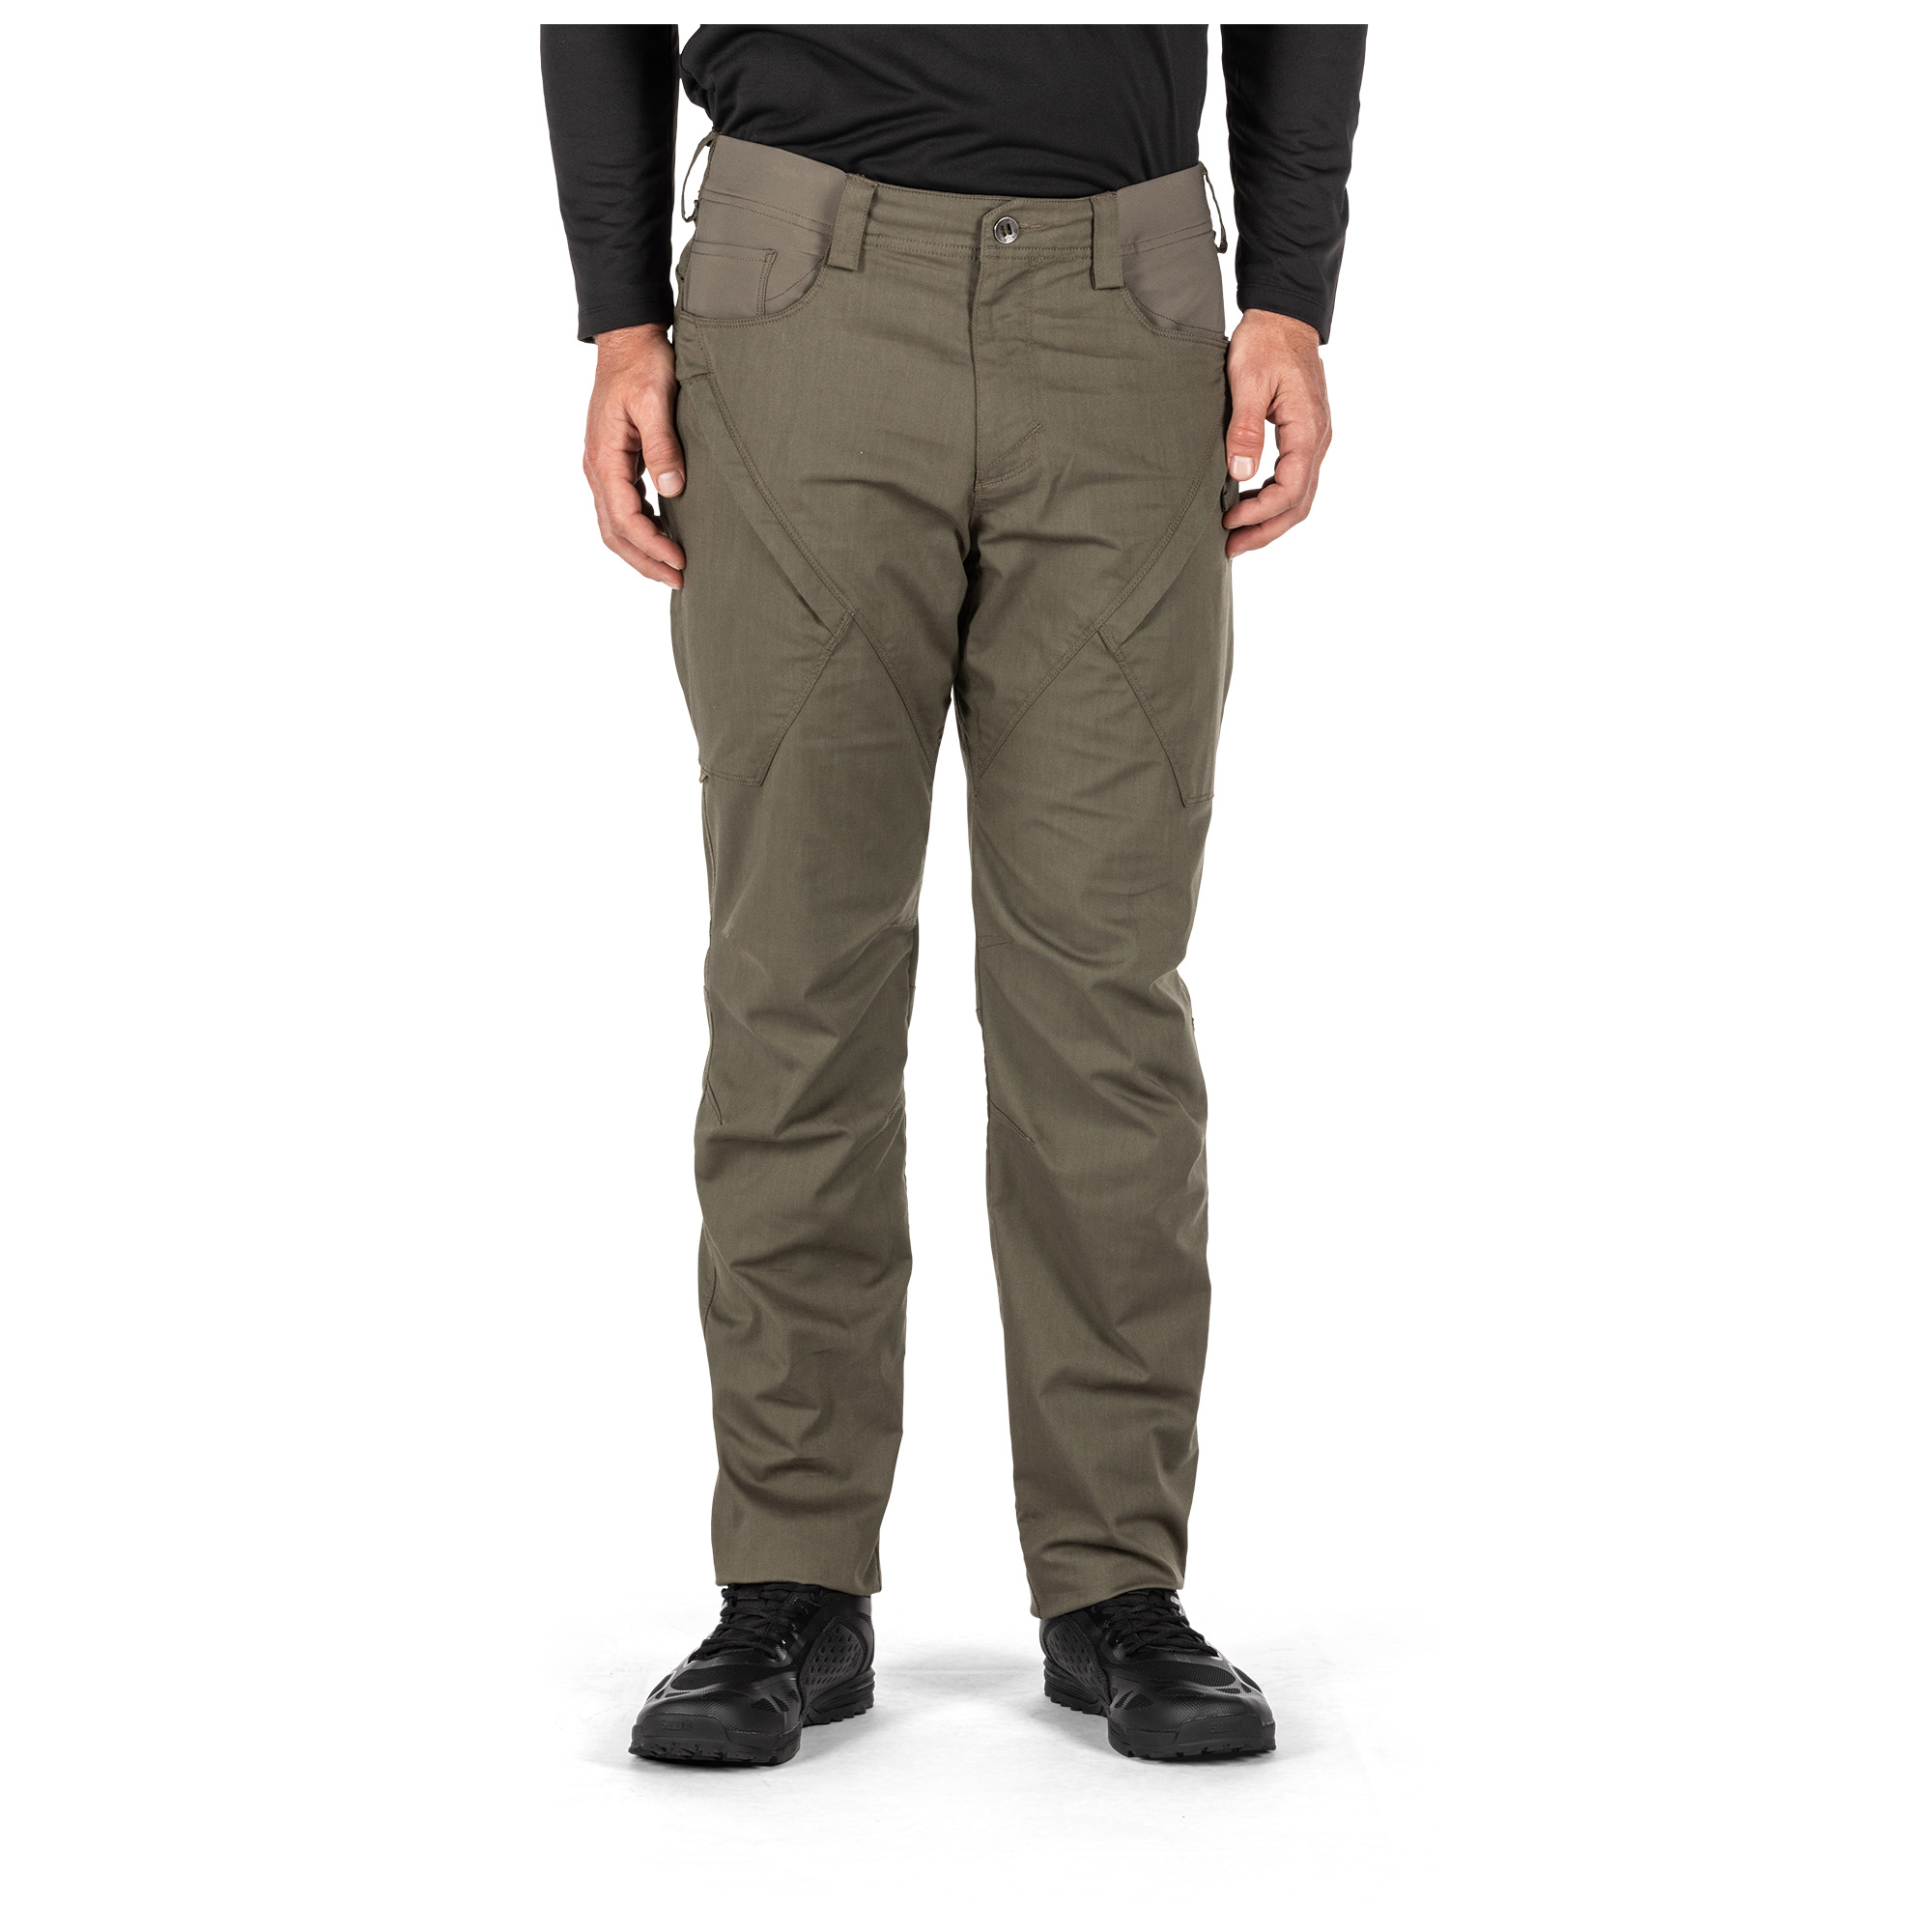 5.11 Reinvents The Cargo Pant